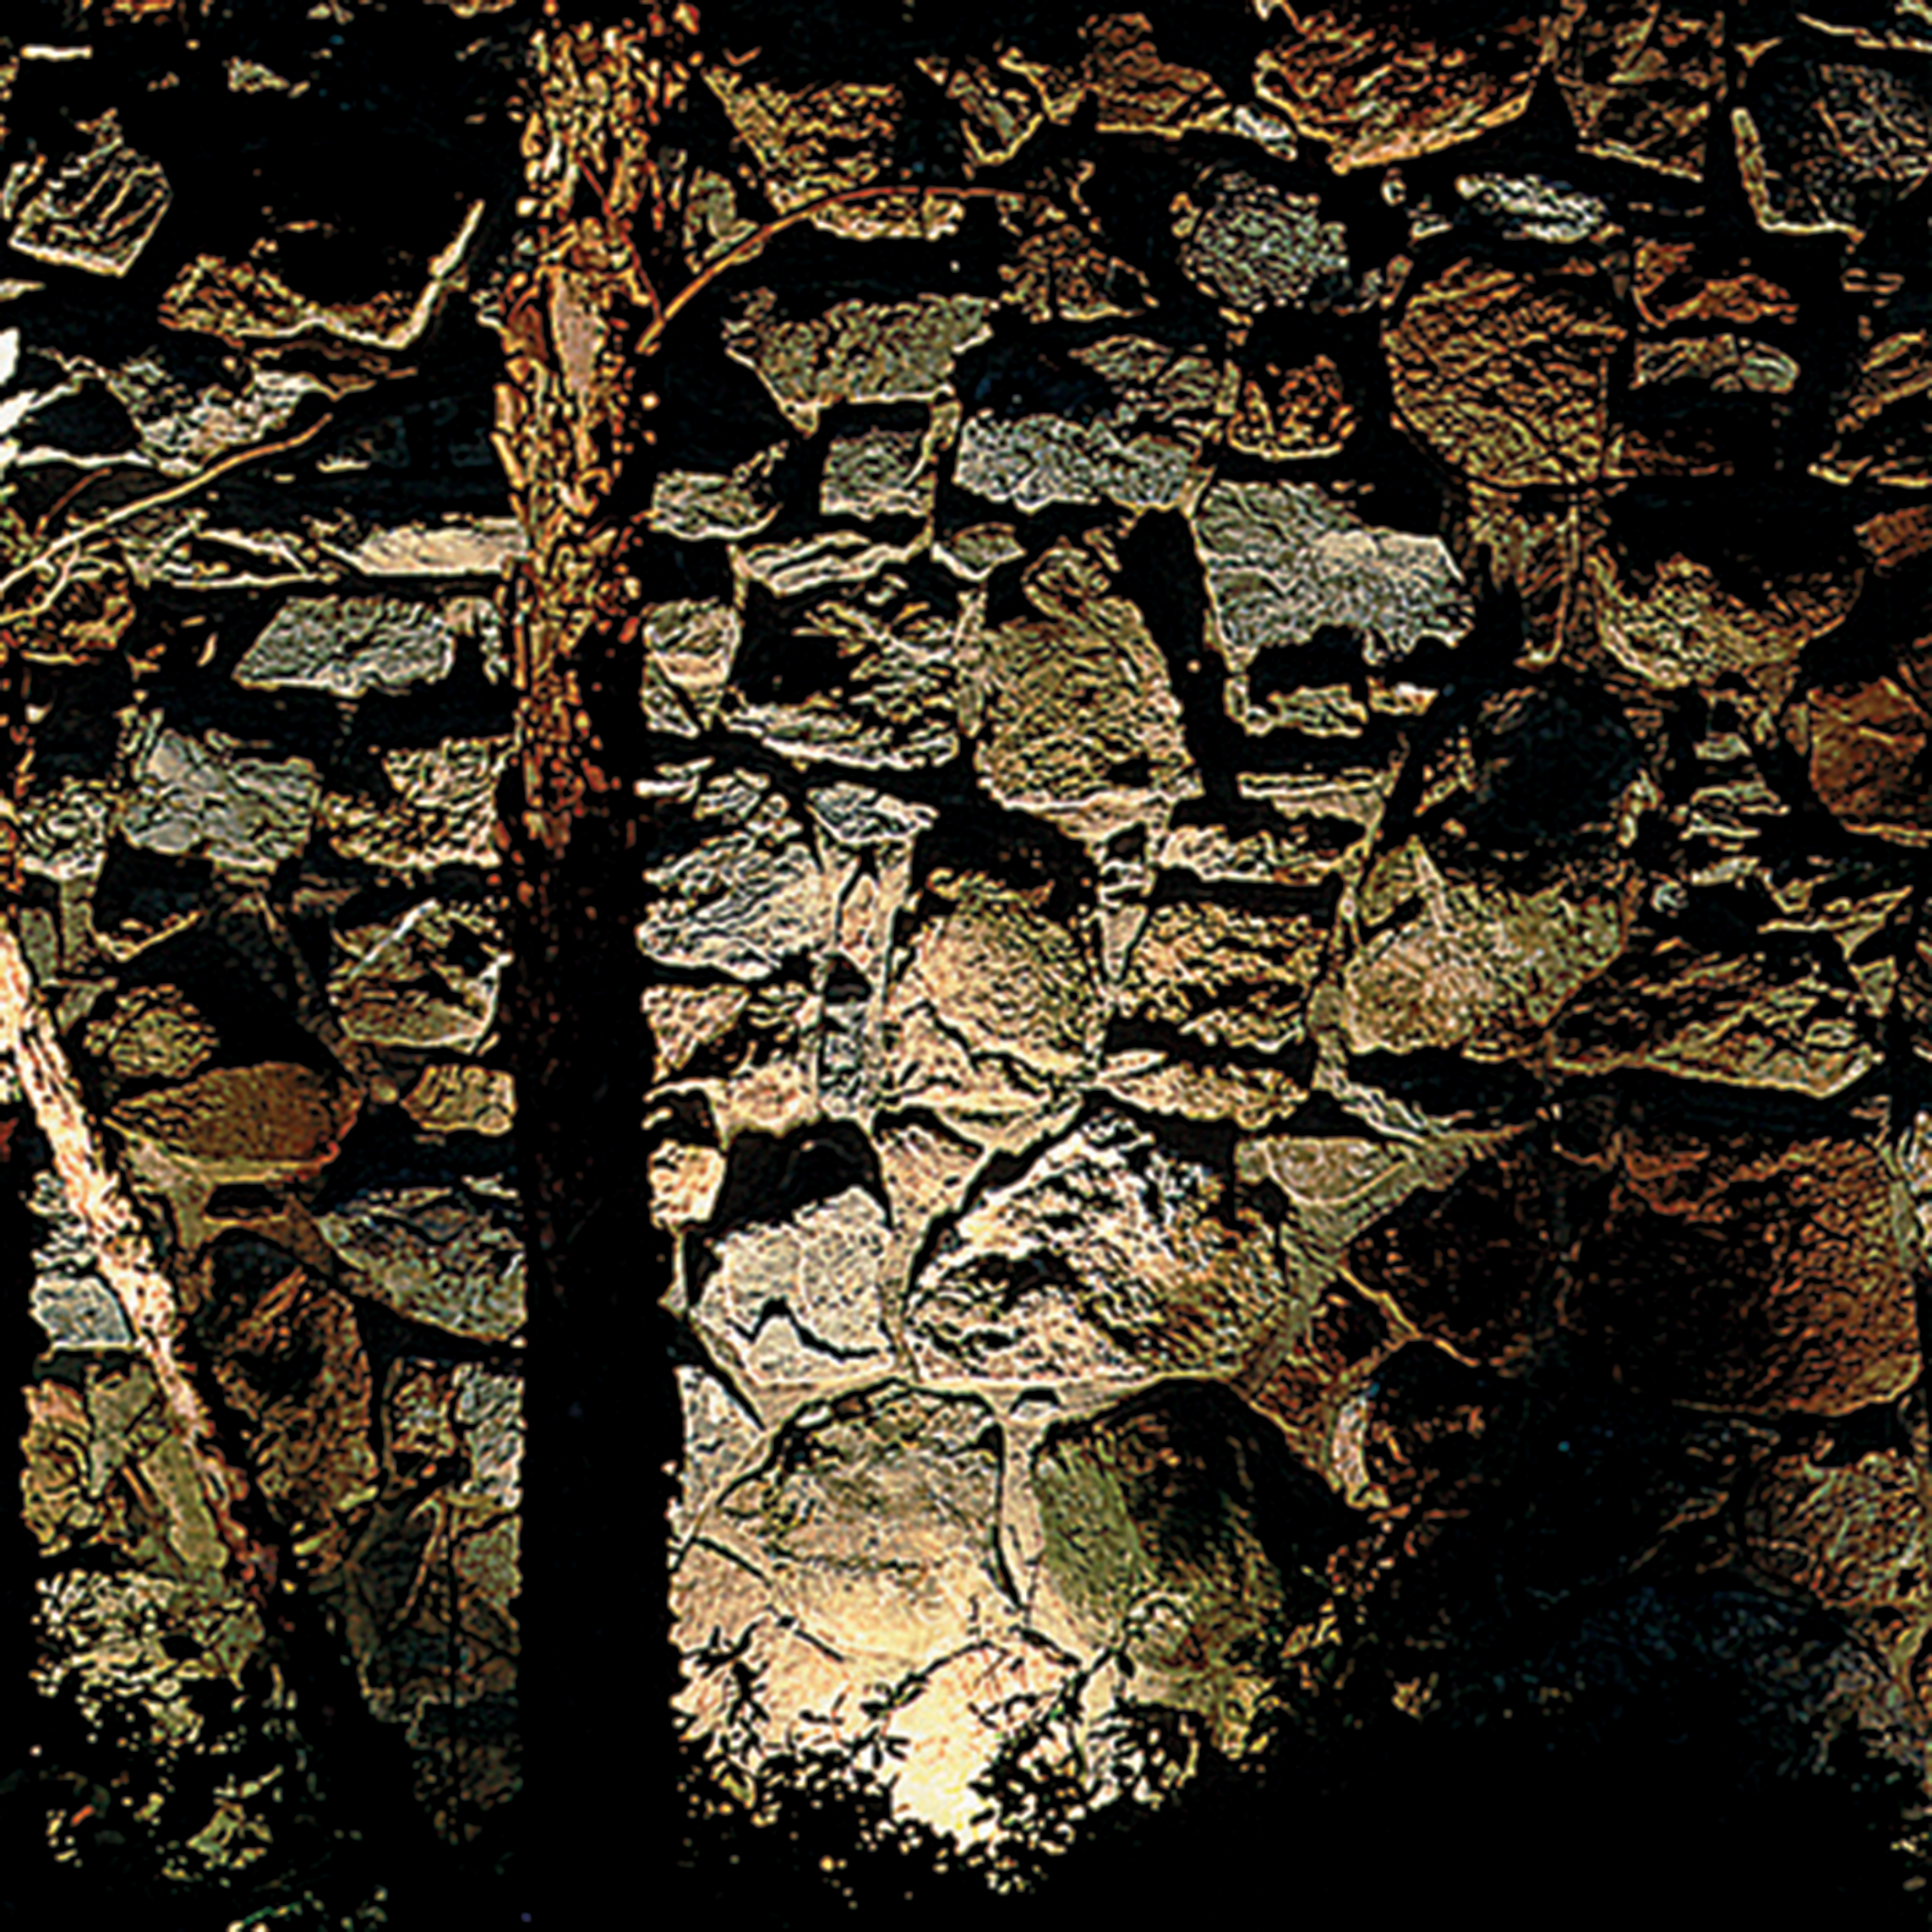 a rock wall in the dark with a light grazing the surface, showing dramatic detail